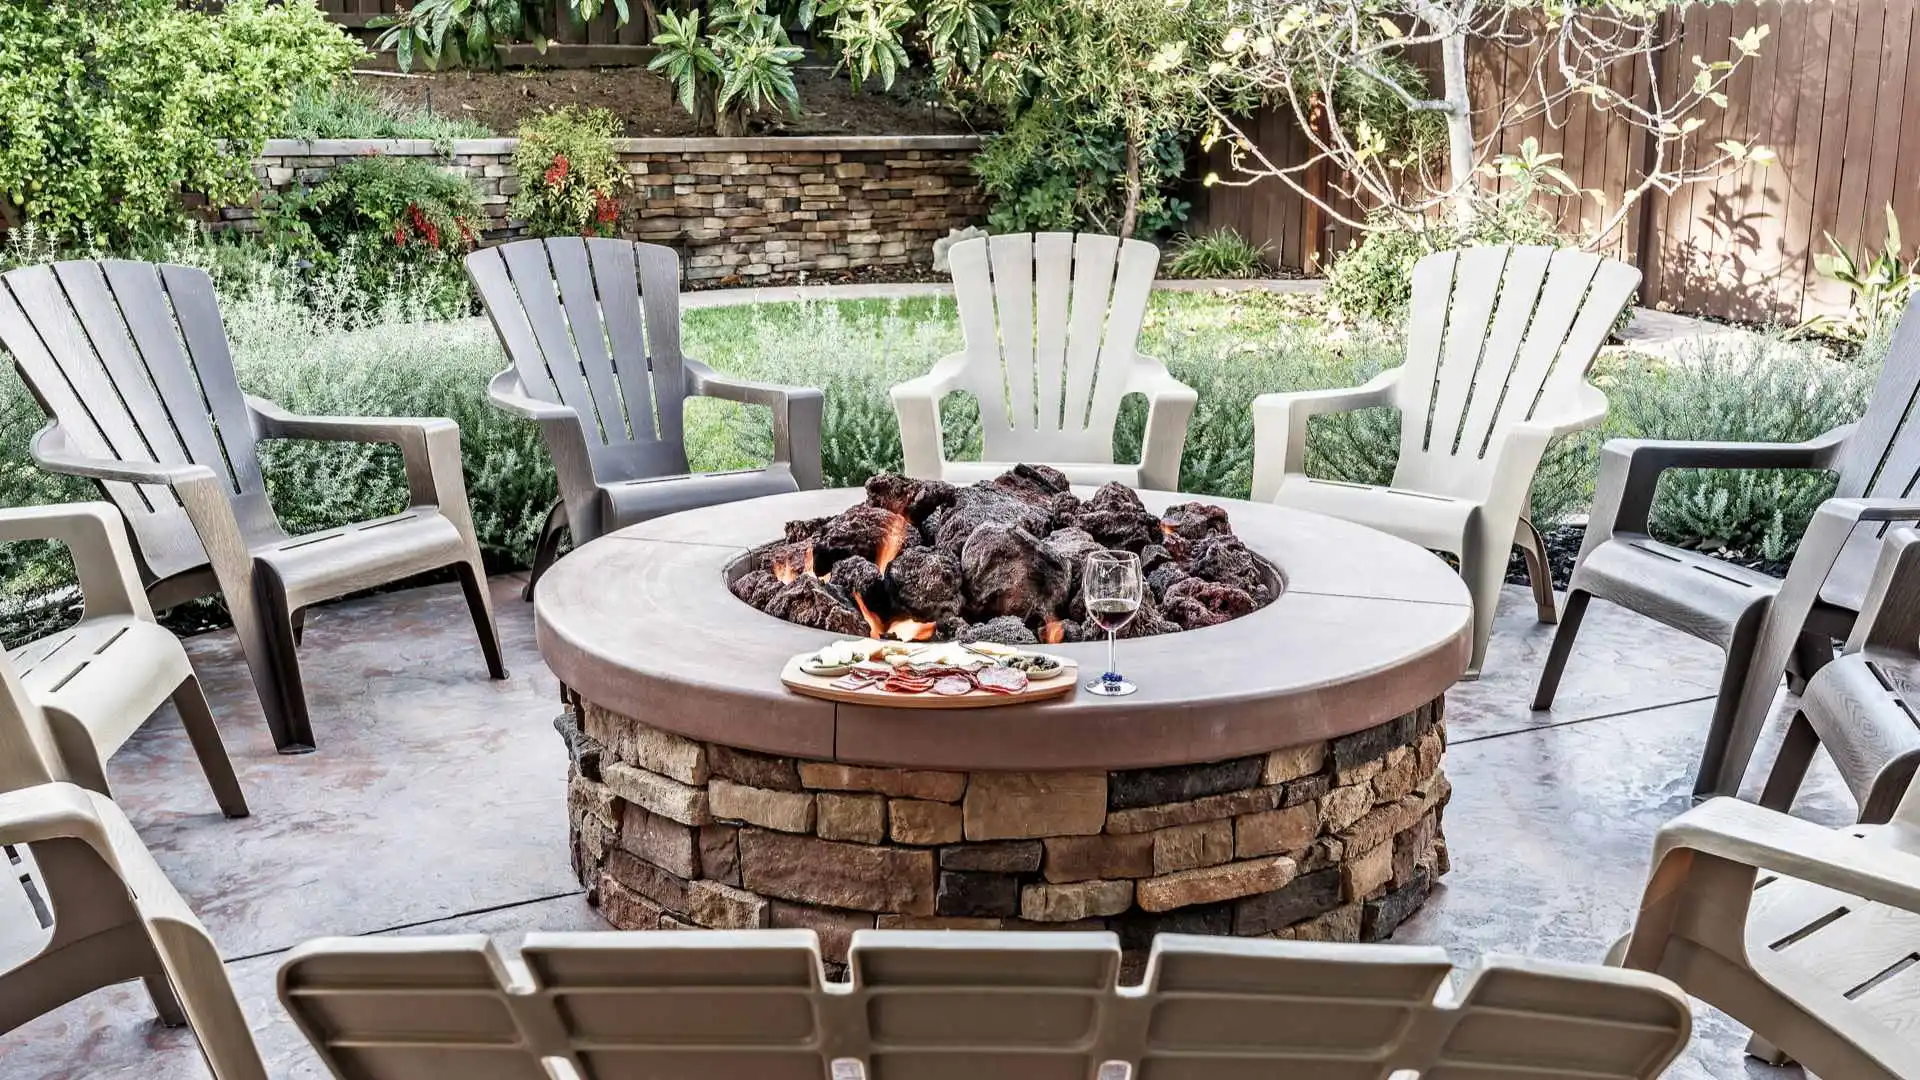 Fire pit with a tray of food and a glass of wine.